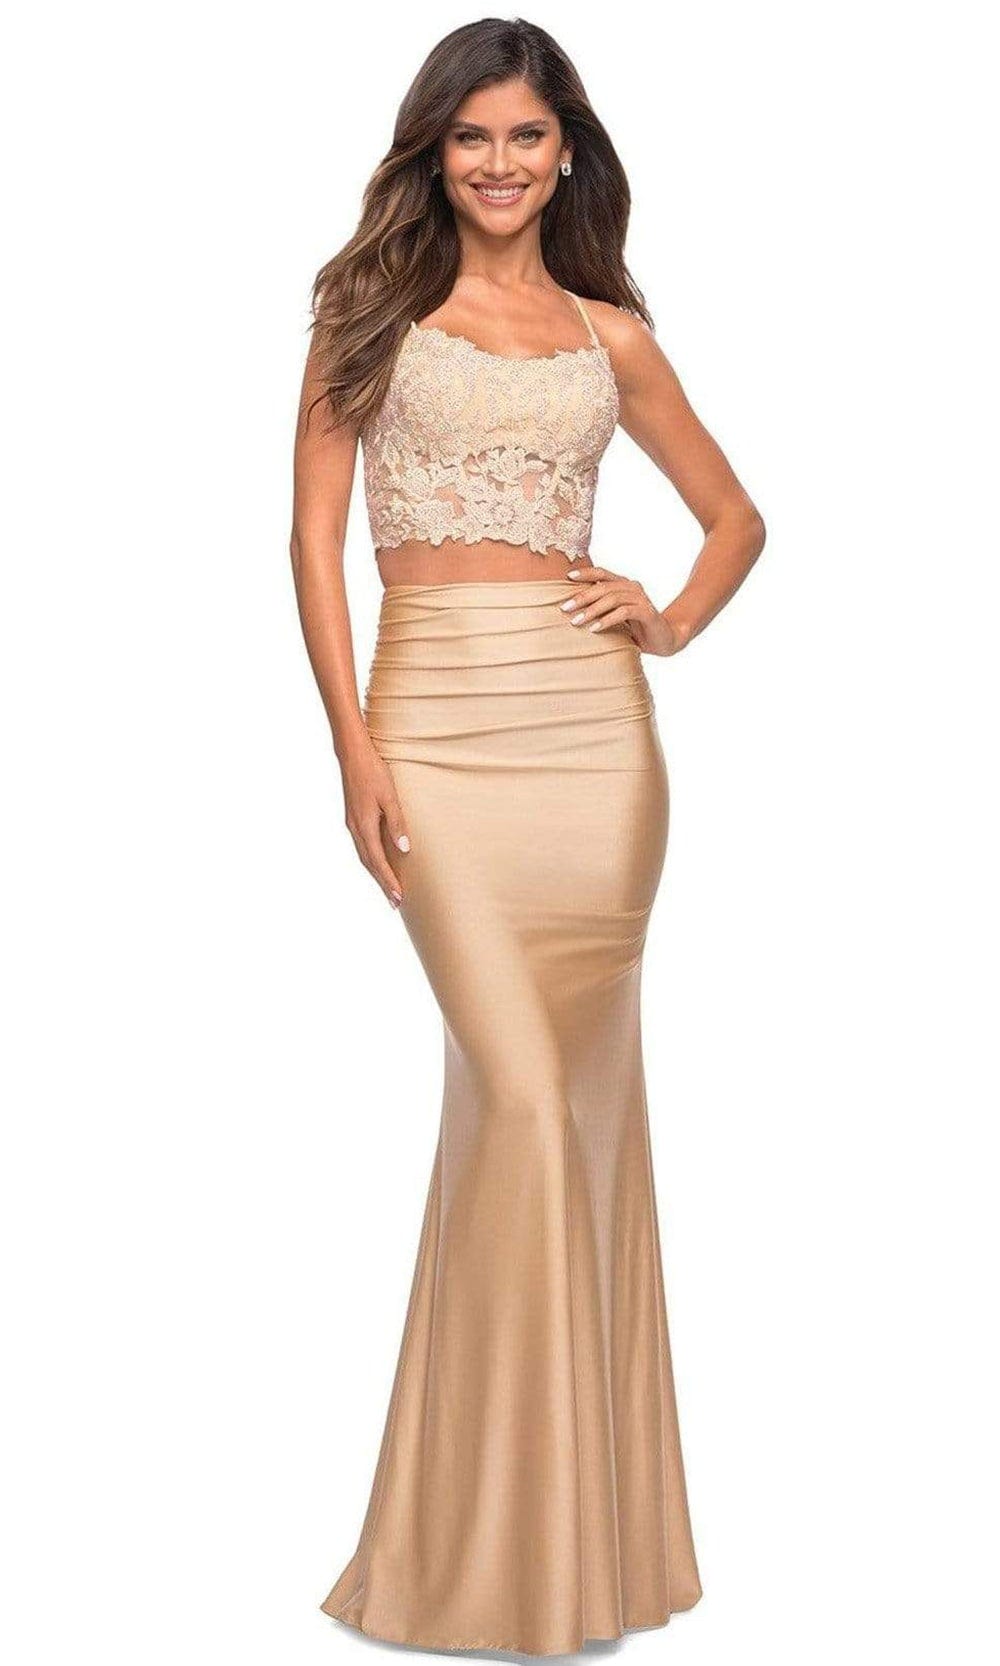 La Femme - 30751 Satin Two Piece Embroidered Gown Prom Dresses 00 / Light Gold